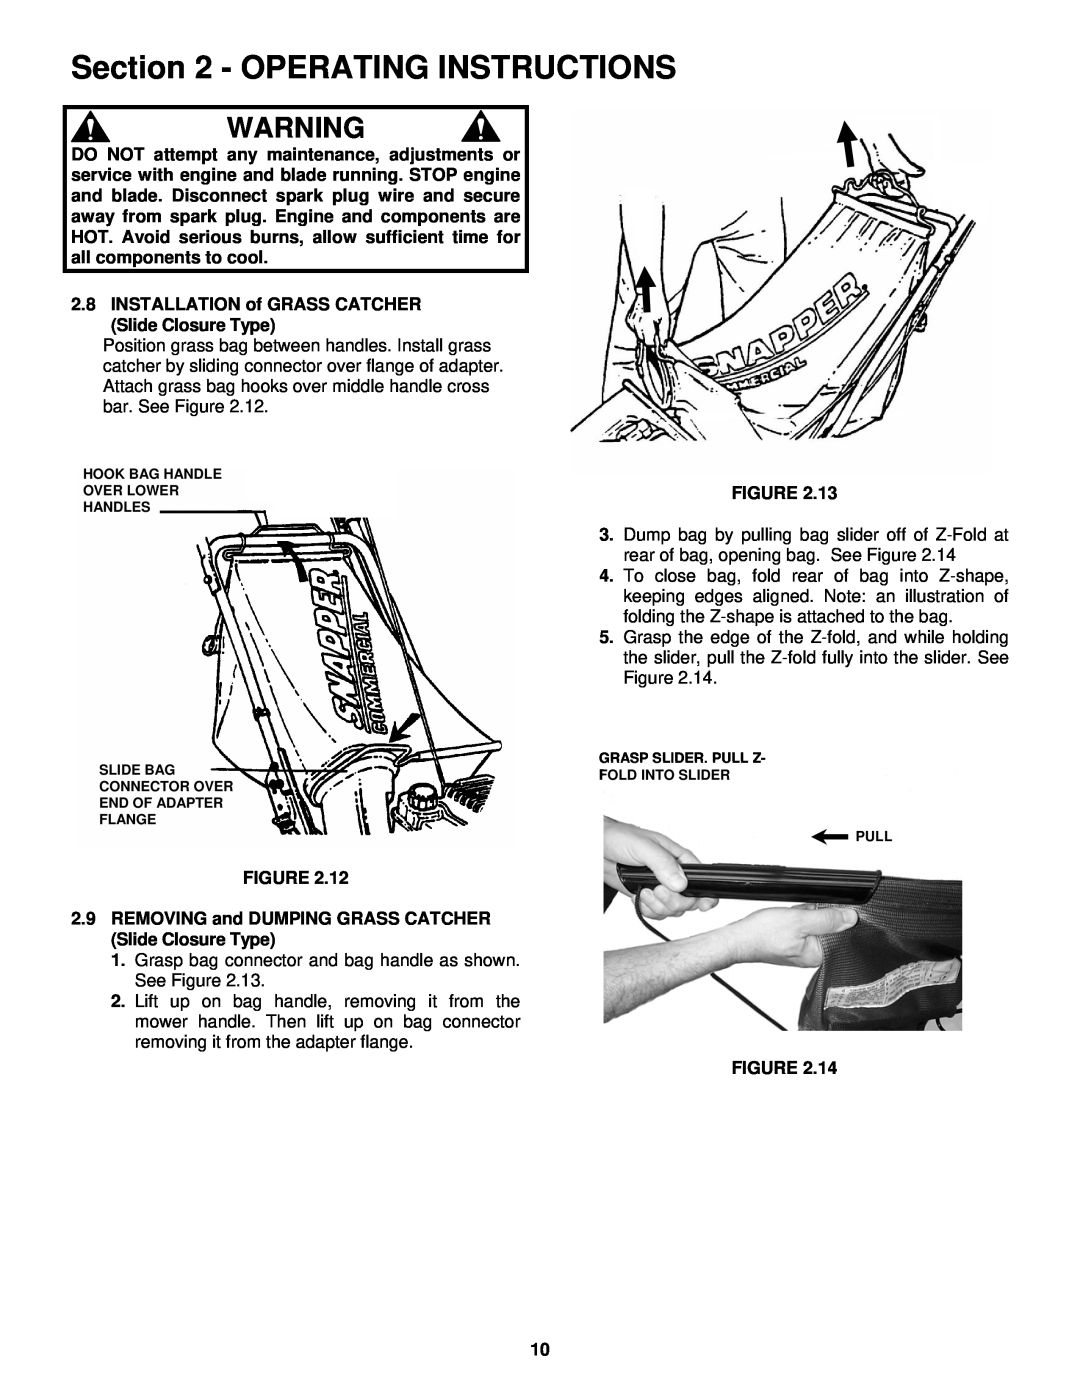 Snapper CP216019KWV, CP215519HV Operating Instructions, Grasp bag connector and bag handle as shown. See Figure 